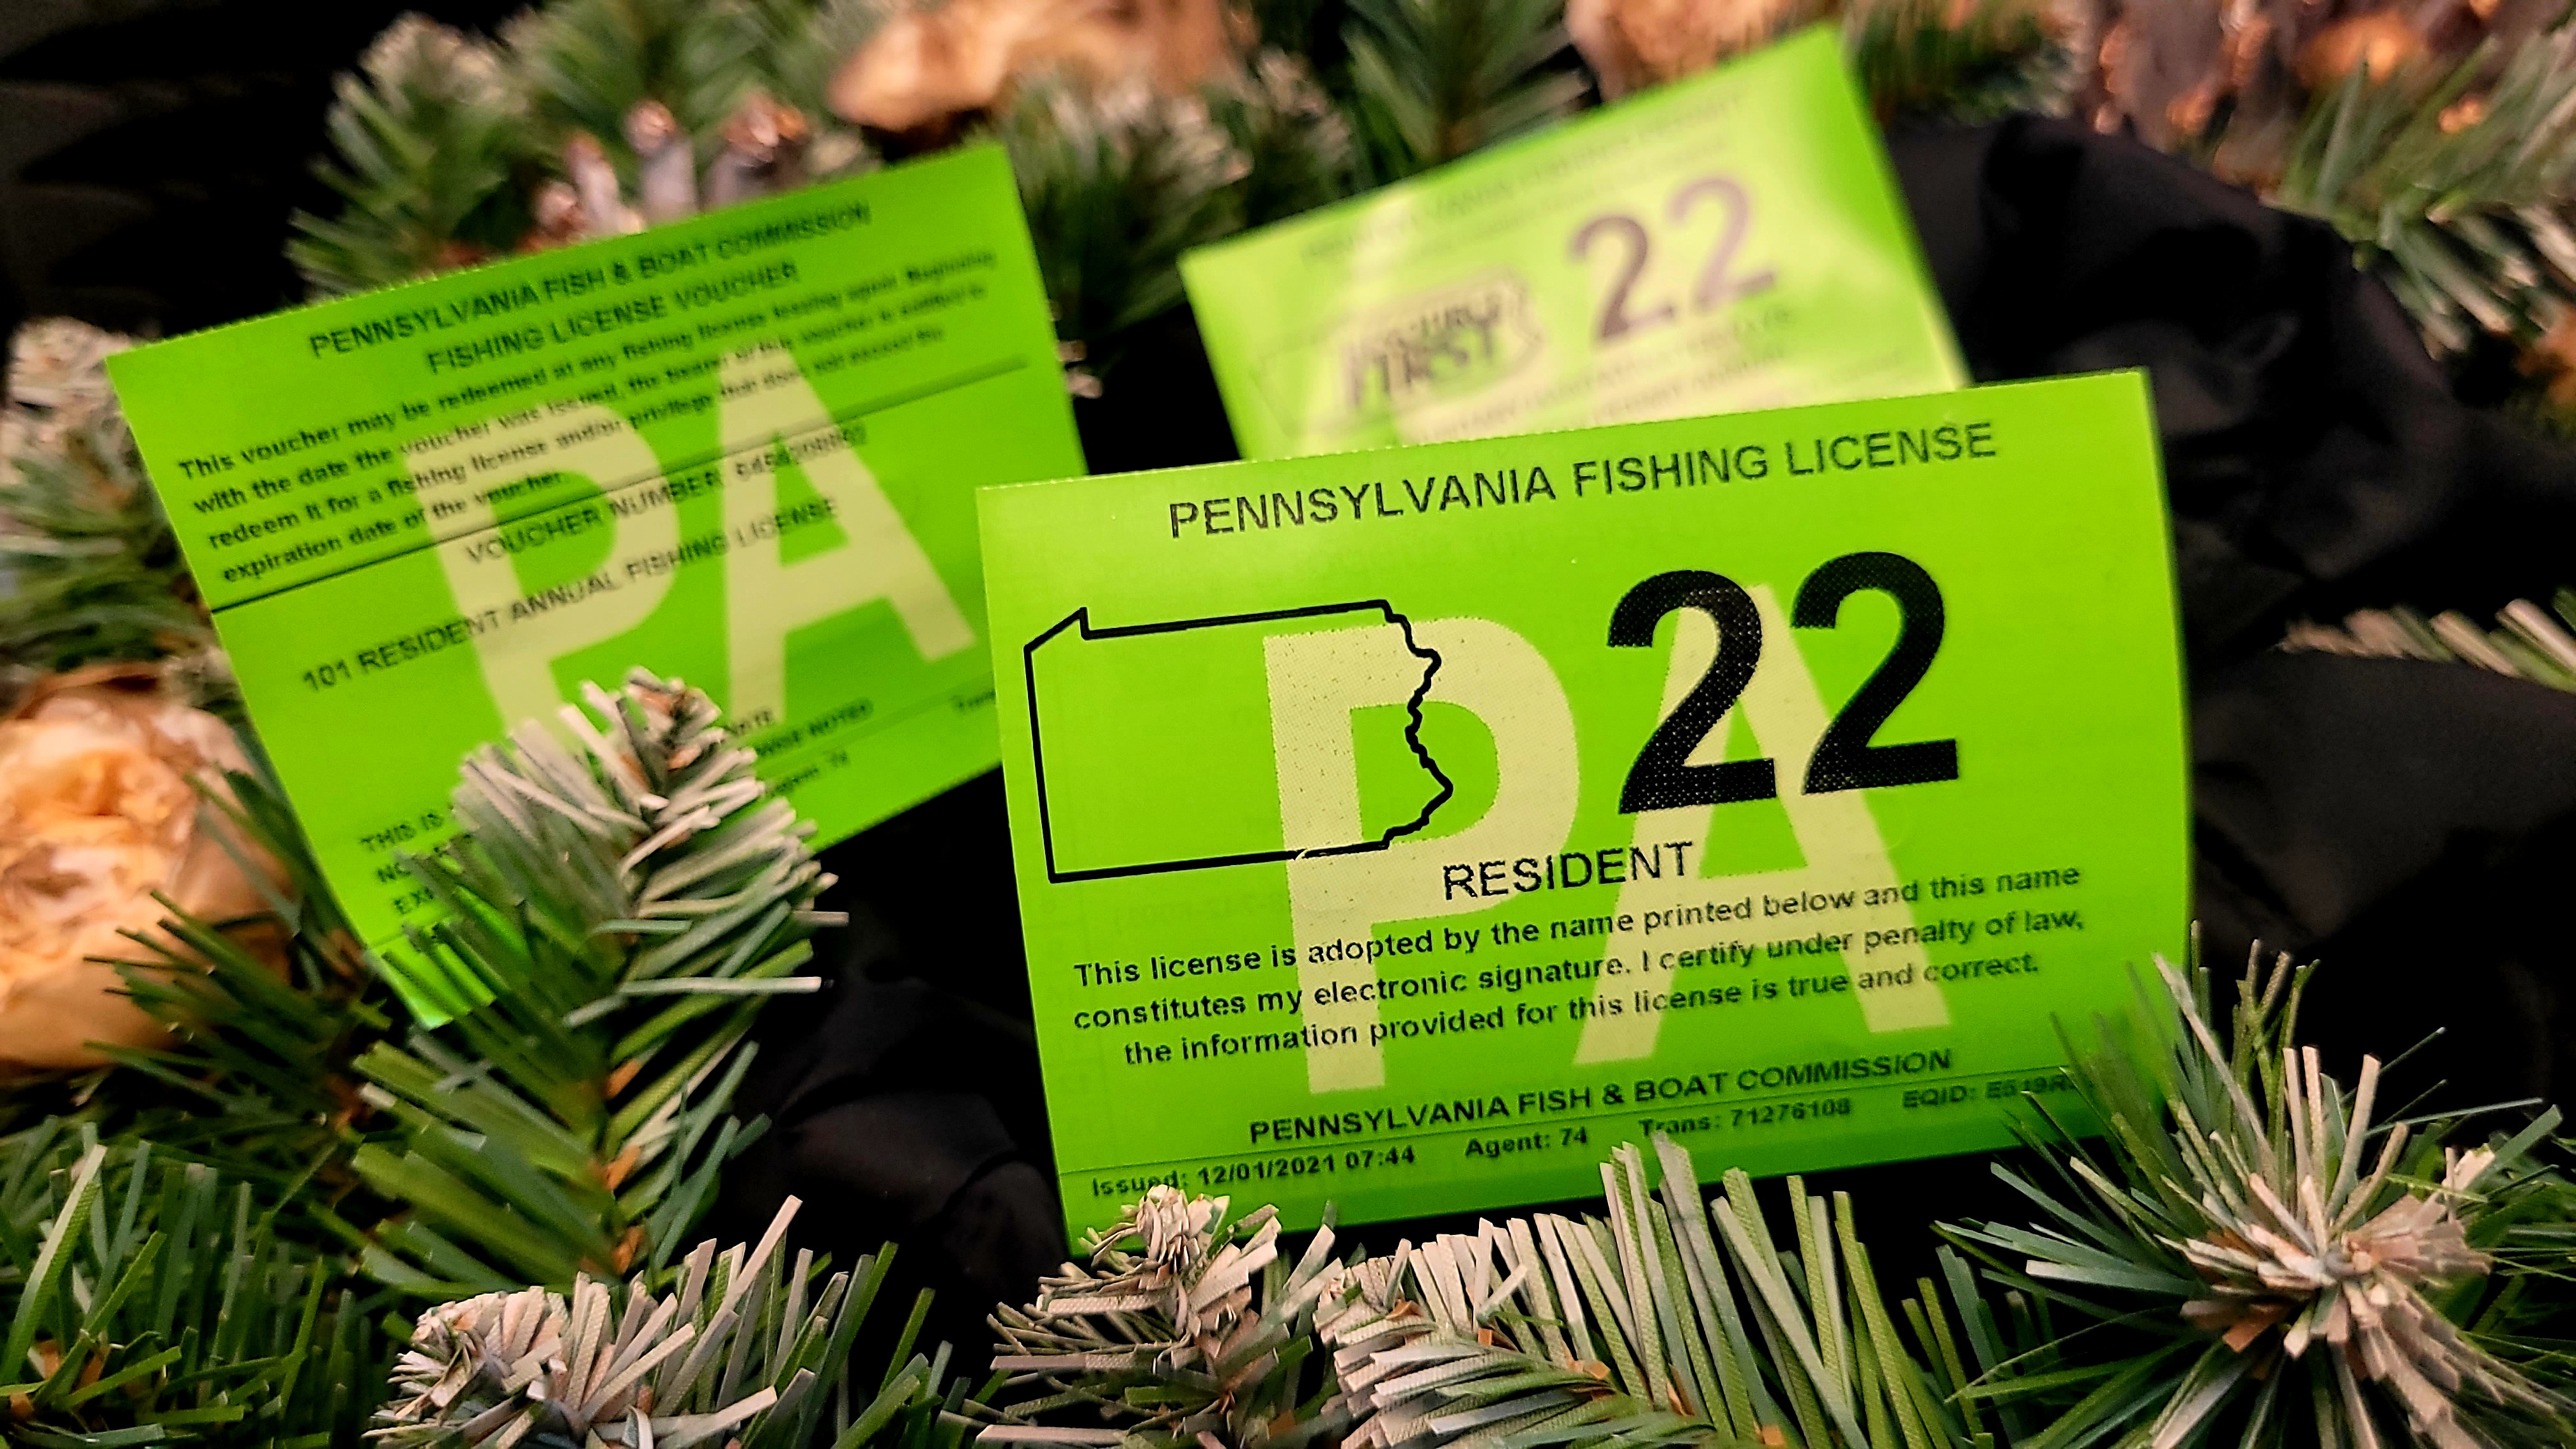 2022 PENNSYLVANIA FISHING LICENSES, PERMITS, AND GIFT VOUCHERS ARE